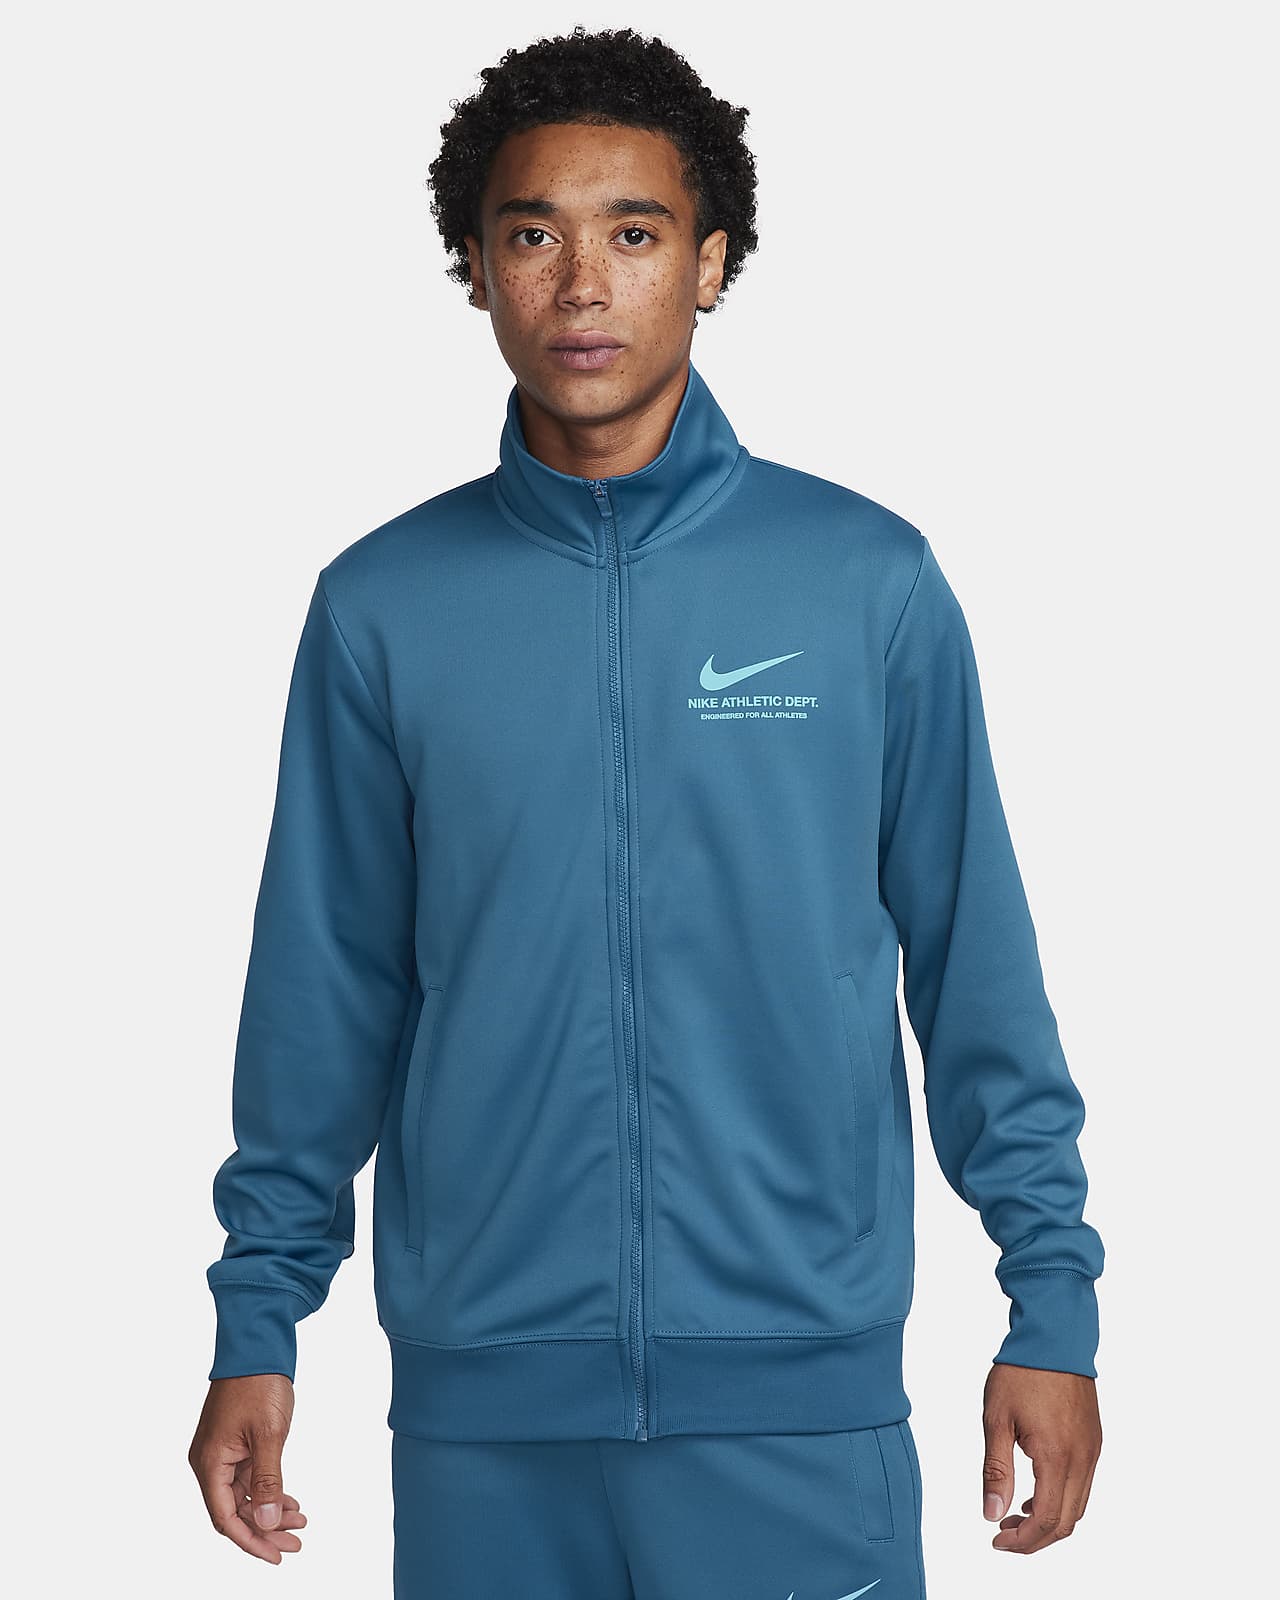 Men's Tracksuits. Nike IN